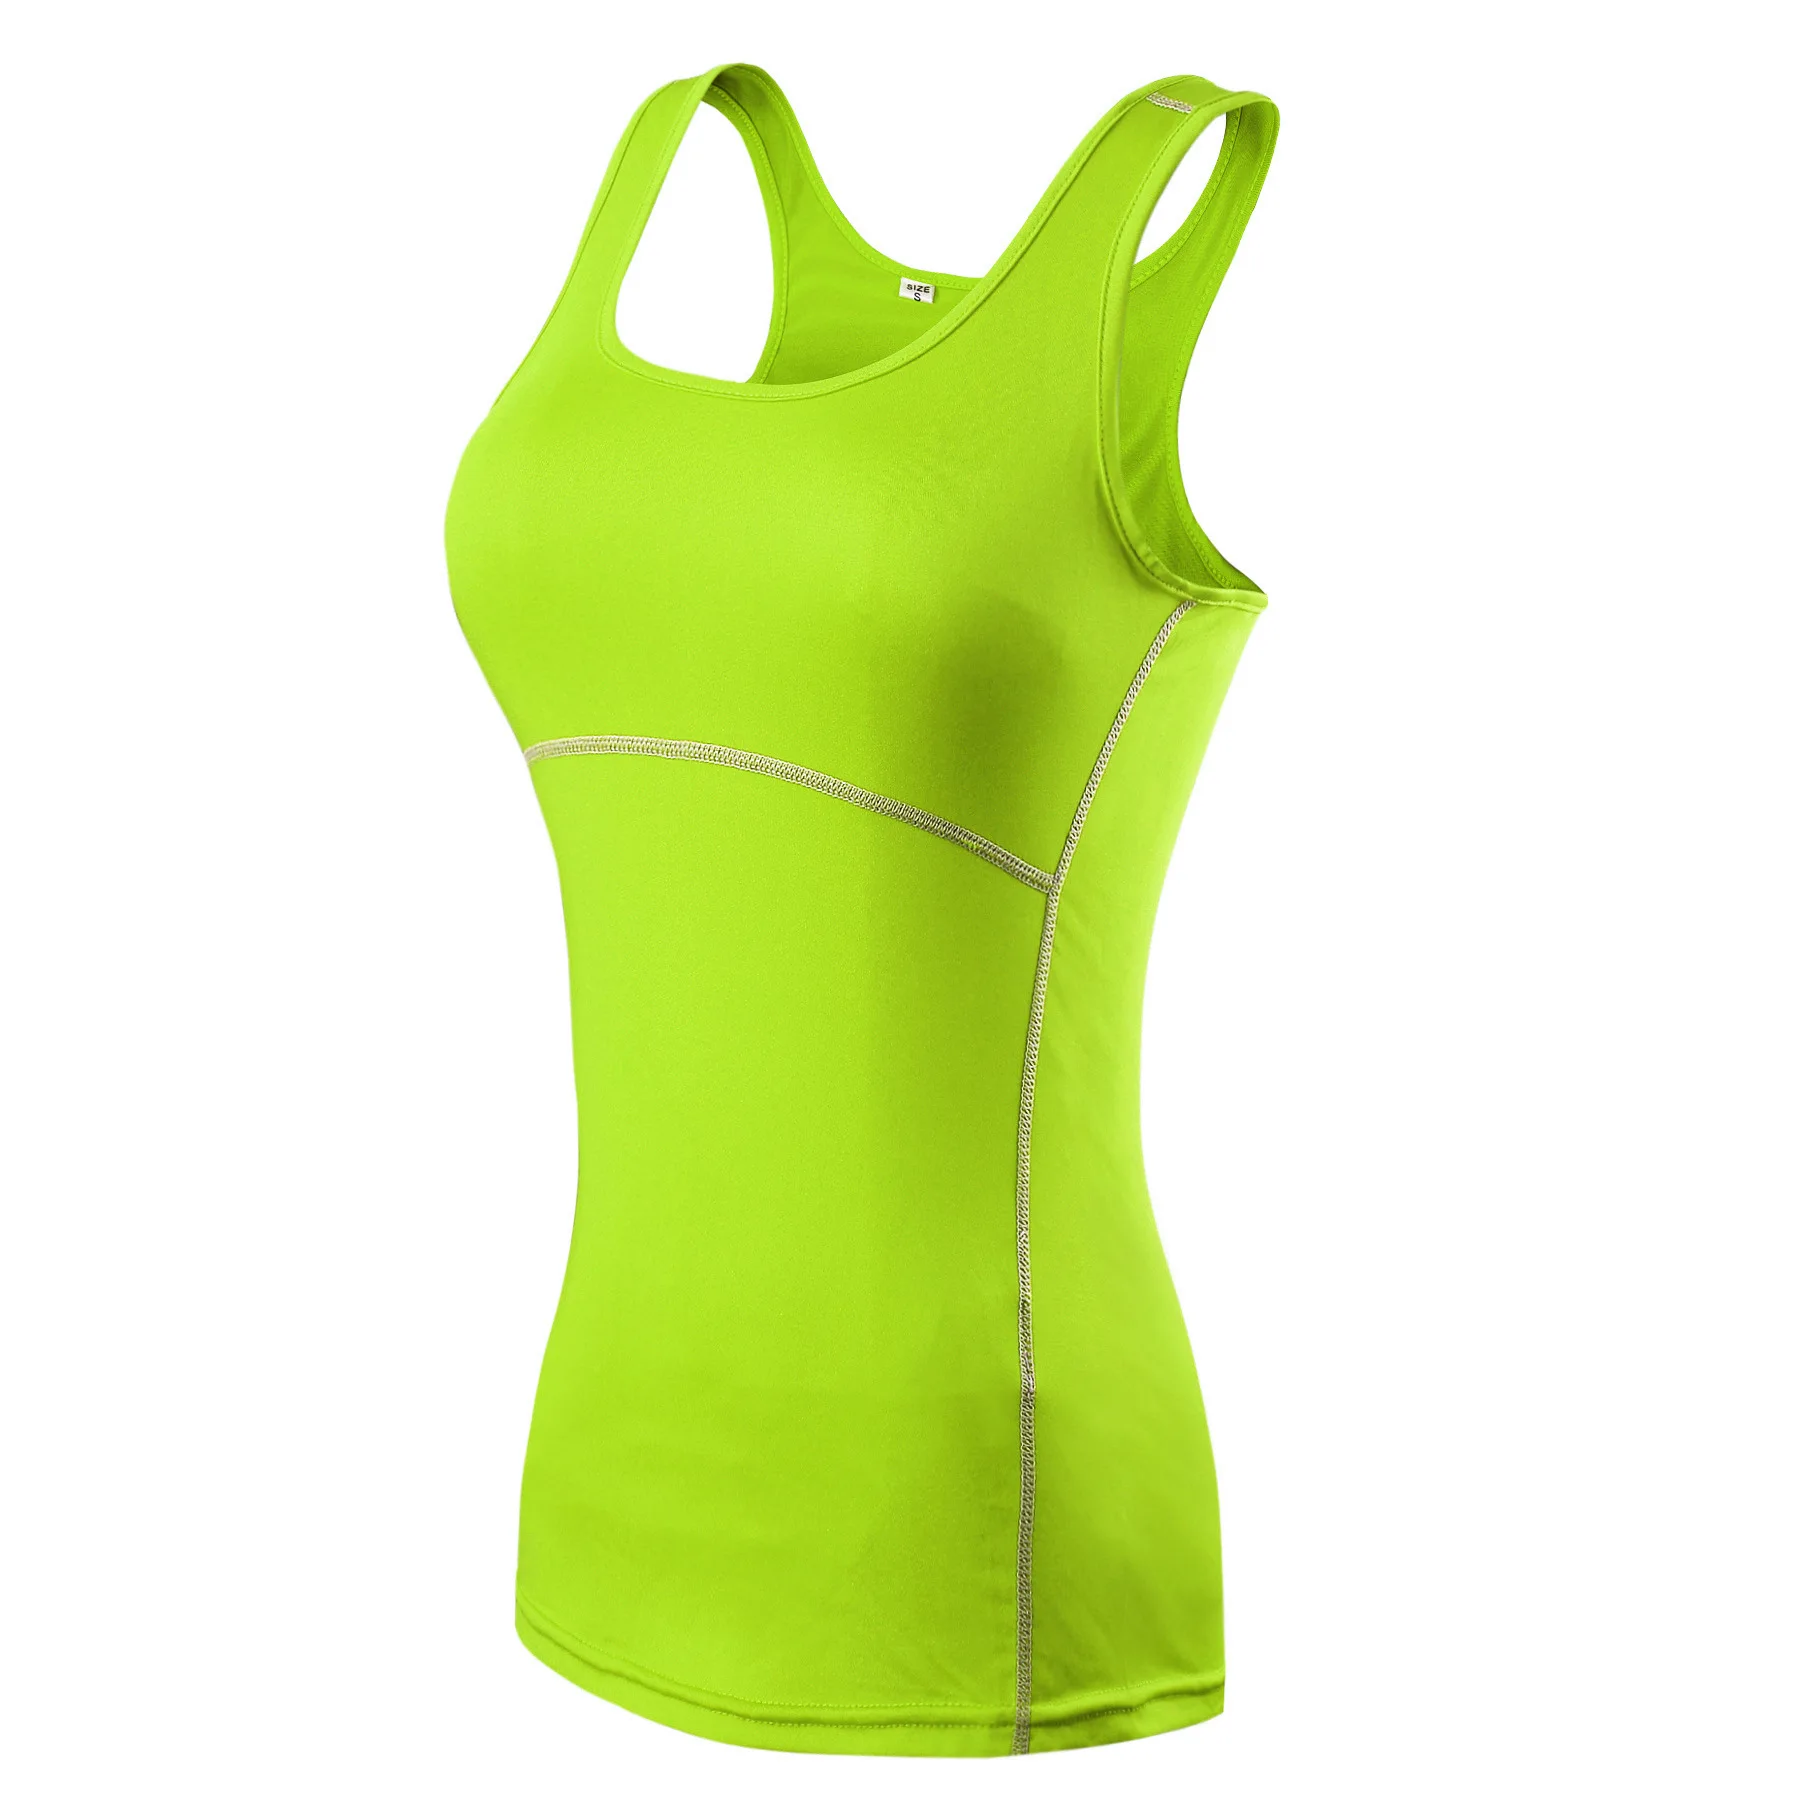 

China Supplier High Performance Fitness Sport Running Skinny Design Workout Flexible Fitness Sleeveless Vest Woman'S Yoga Tank Top, As pics show